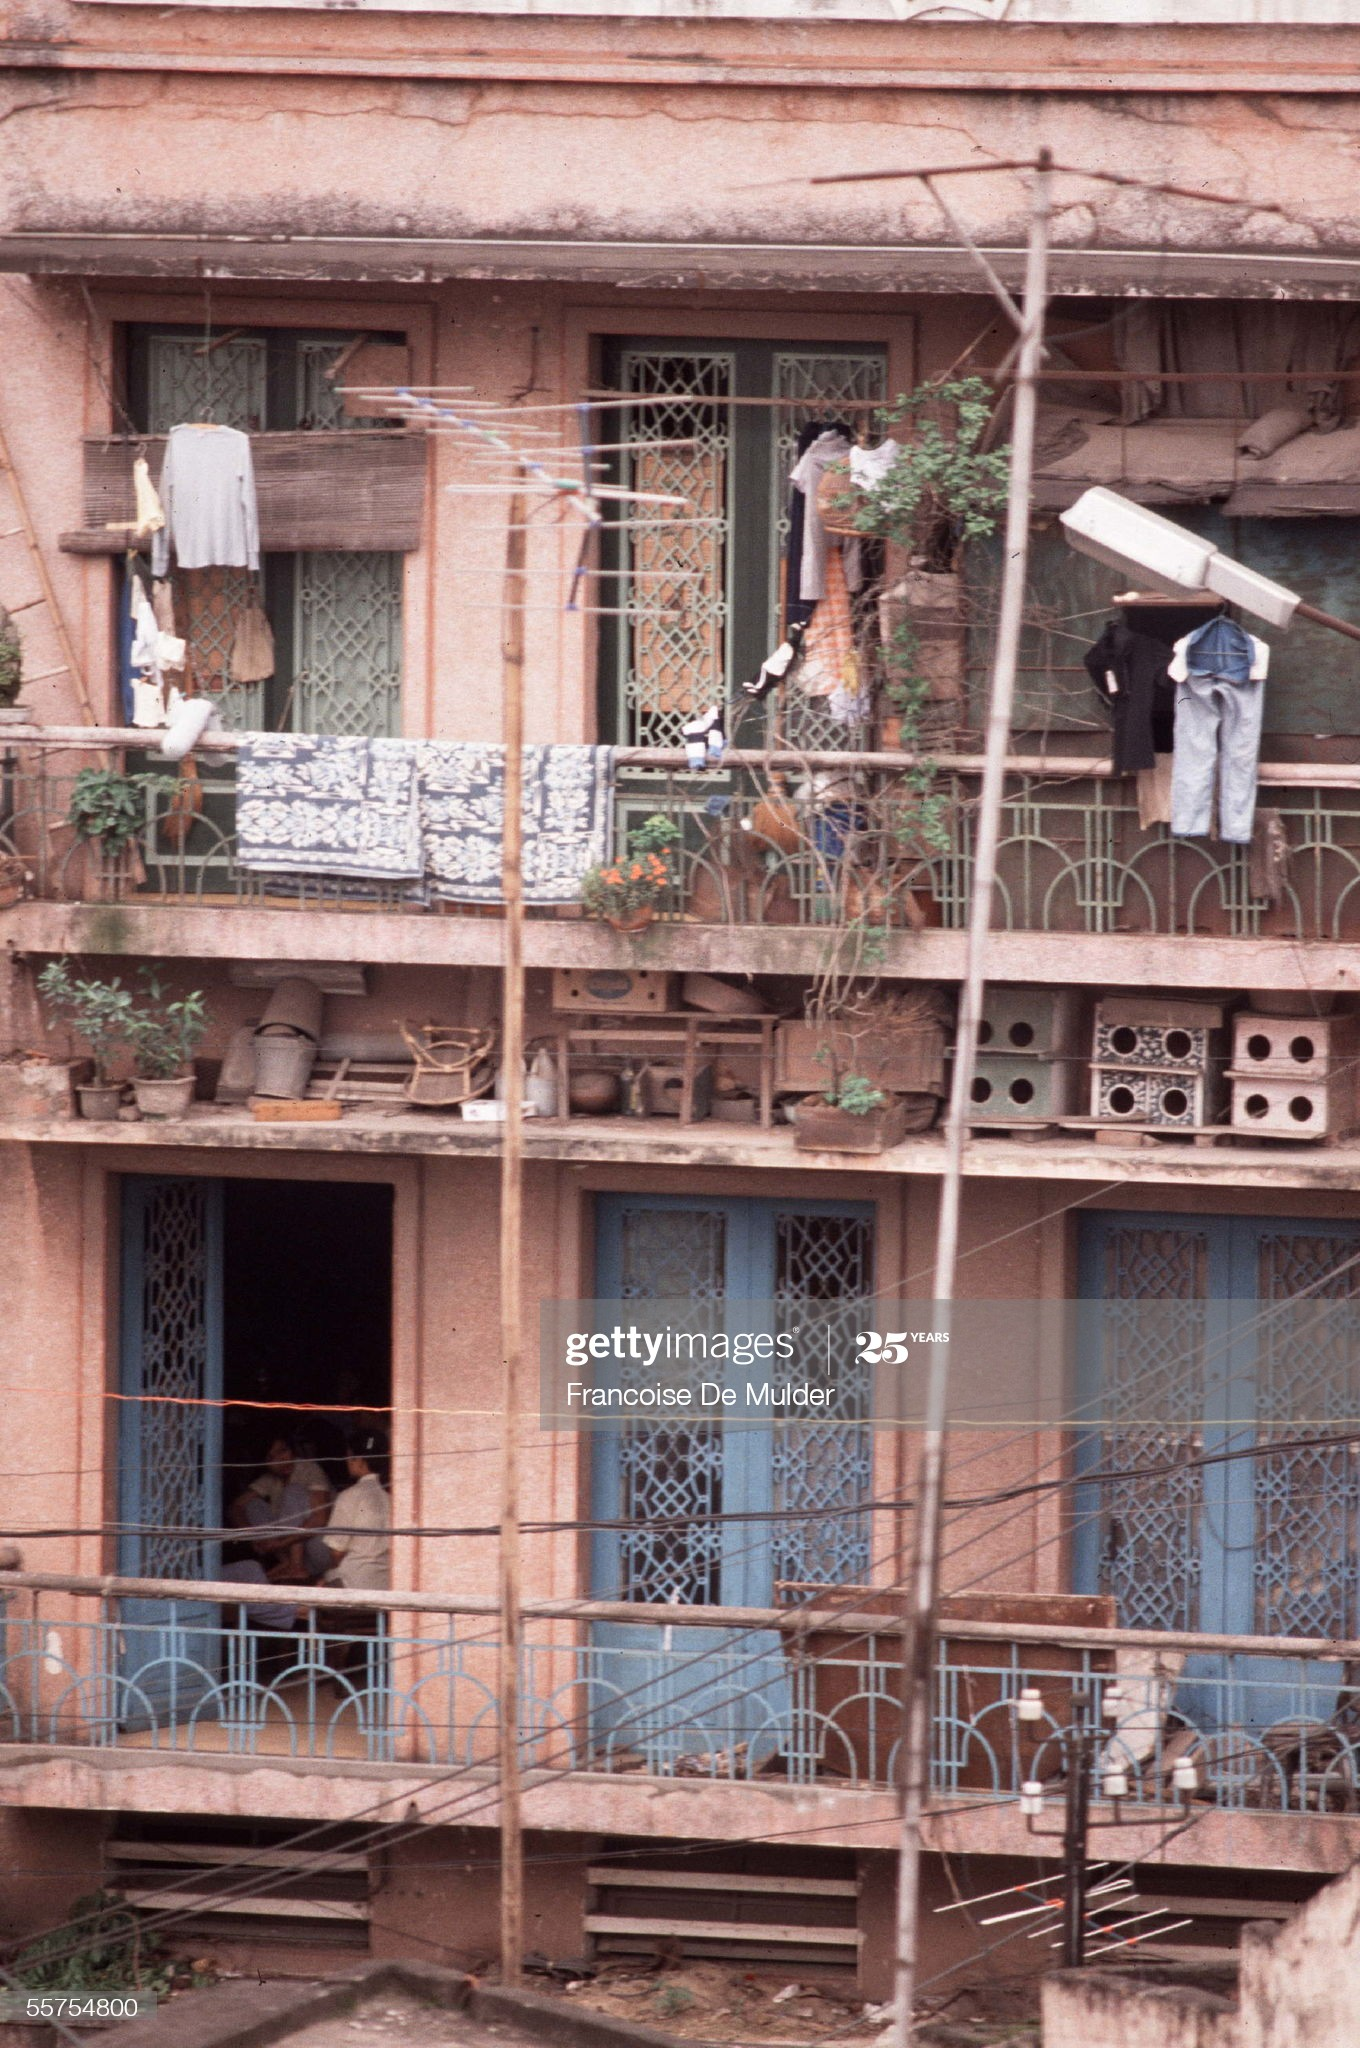 rustic life of hanoi in 1989 through french journalists lens